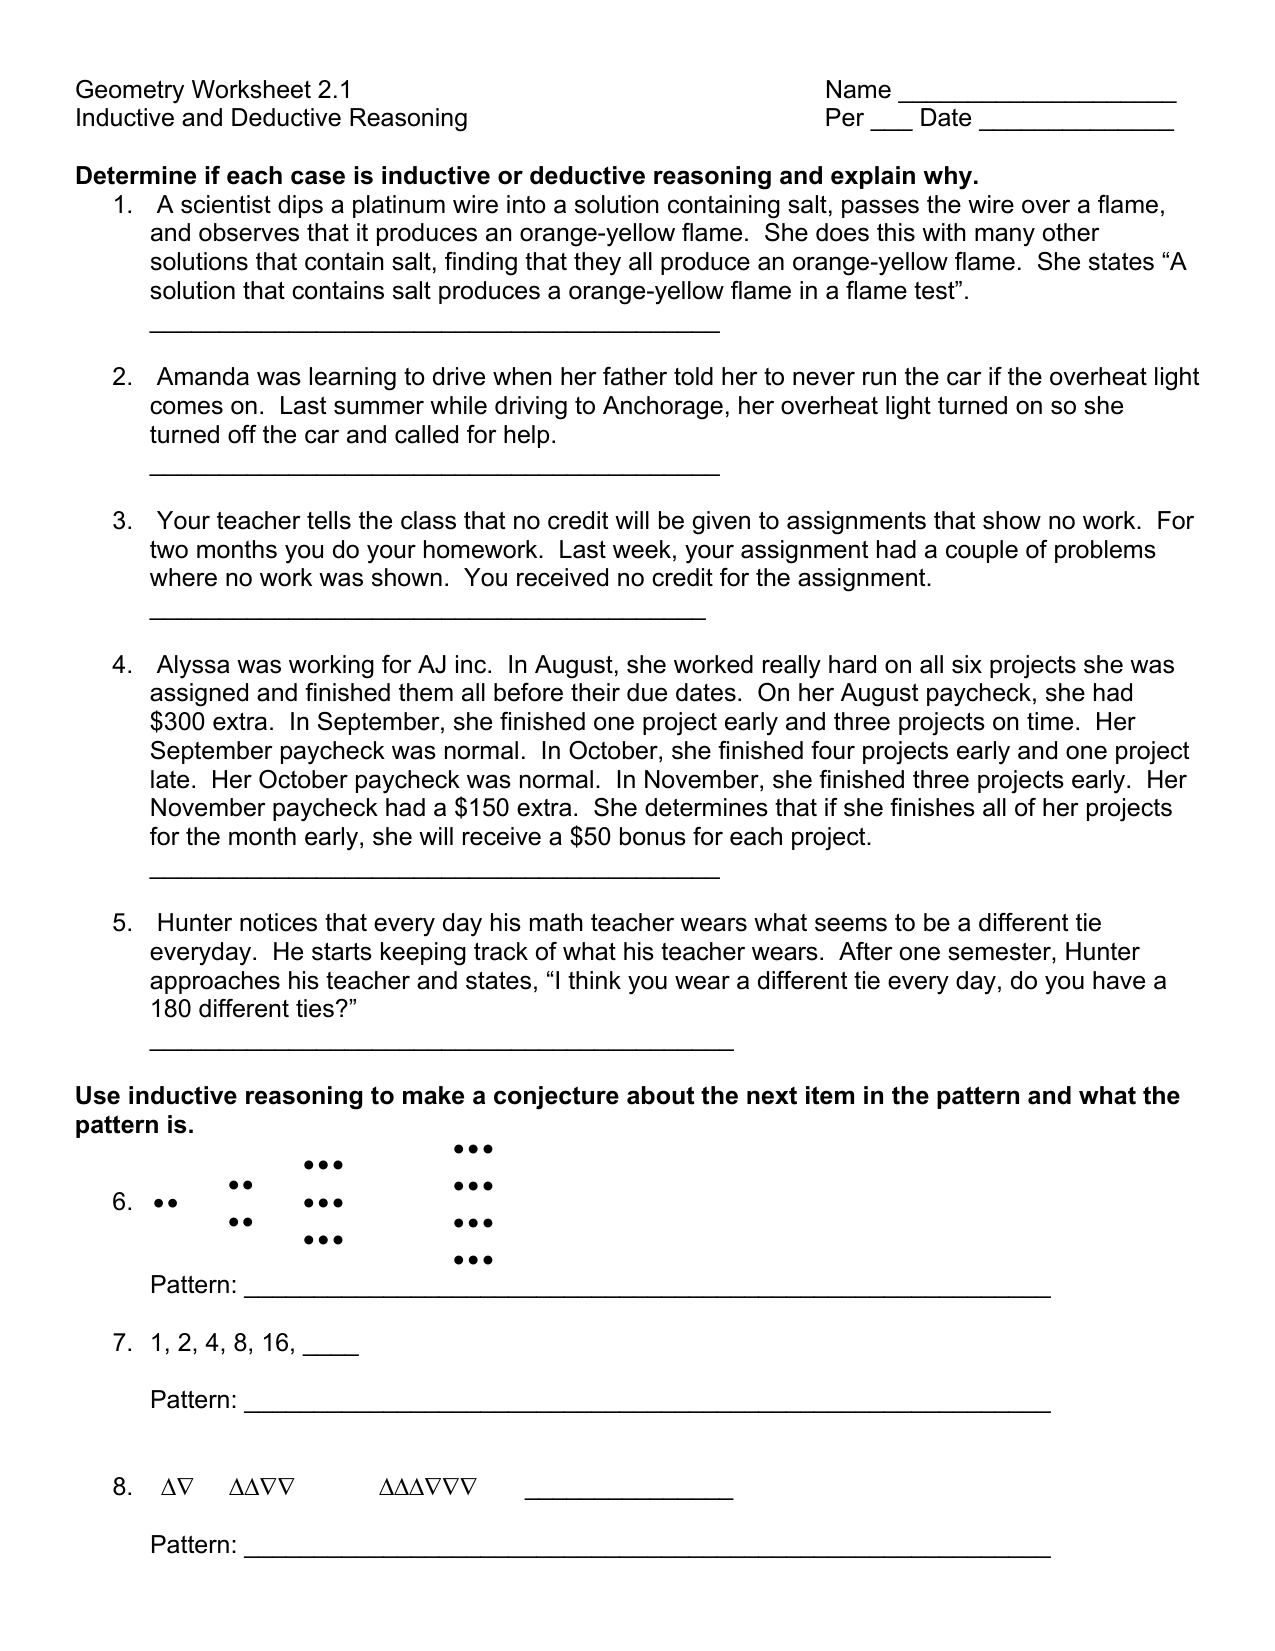 Geometry Worksheet 22.22 Name Inductive and Deductive Reasoning In Inductive And Deductive Reasoning Worksheet